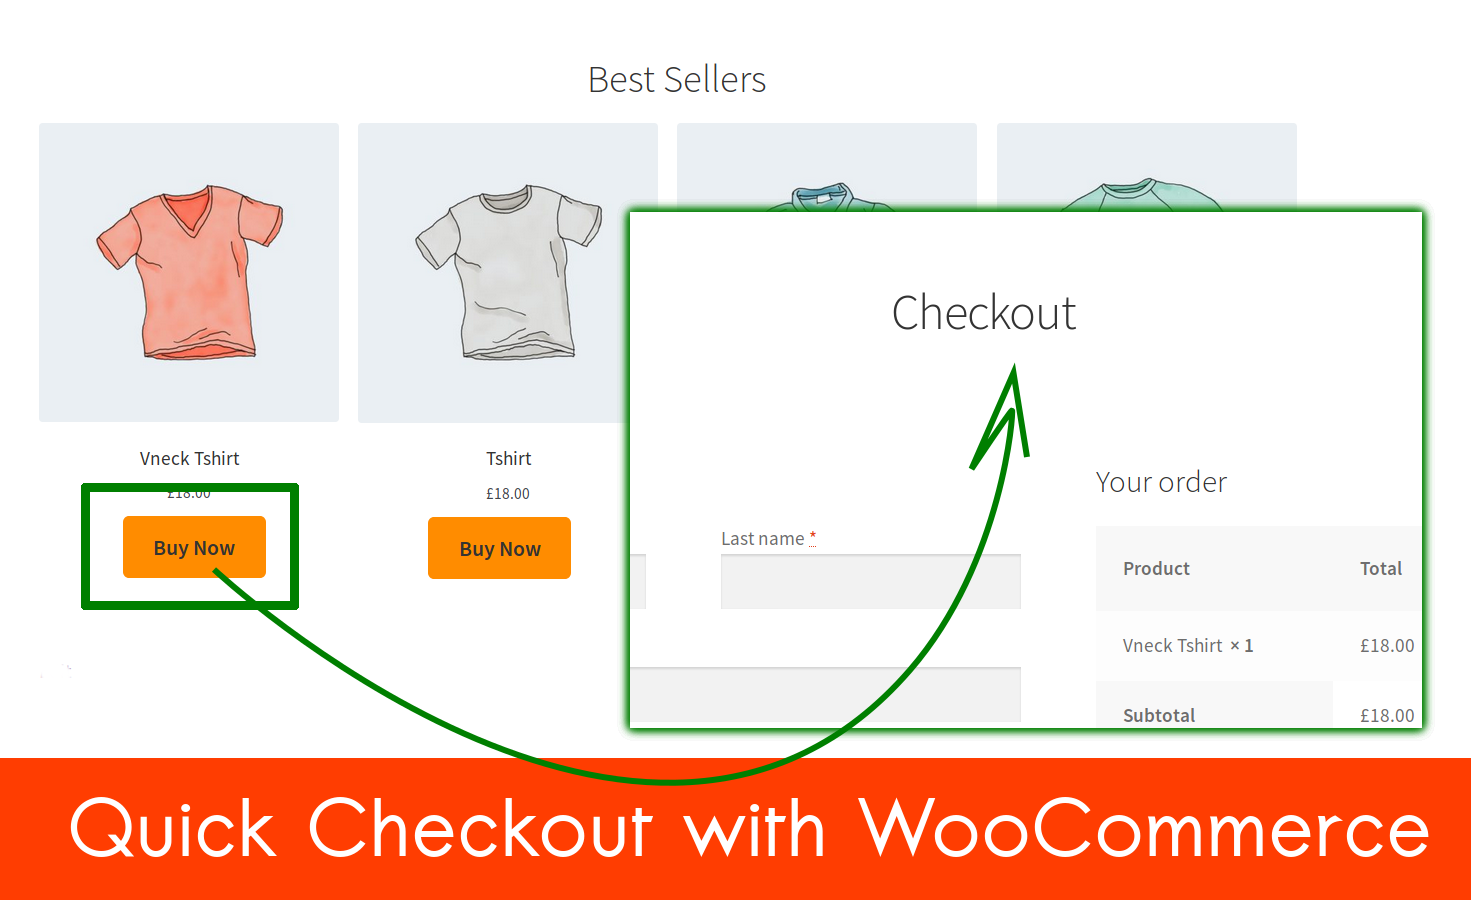 How to Optimize Your WooCommerce Store for Single Product/Item Checkout